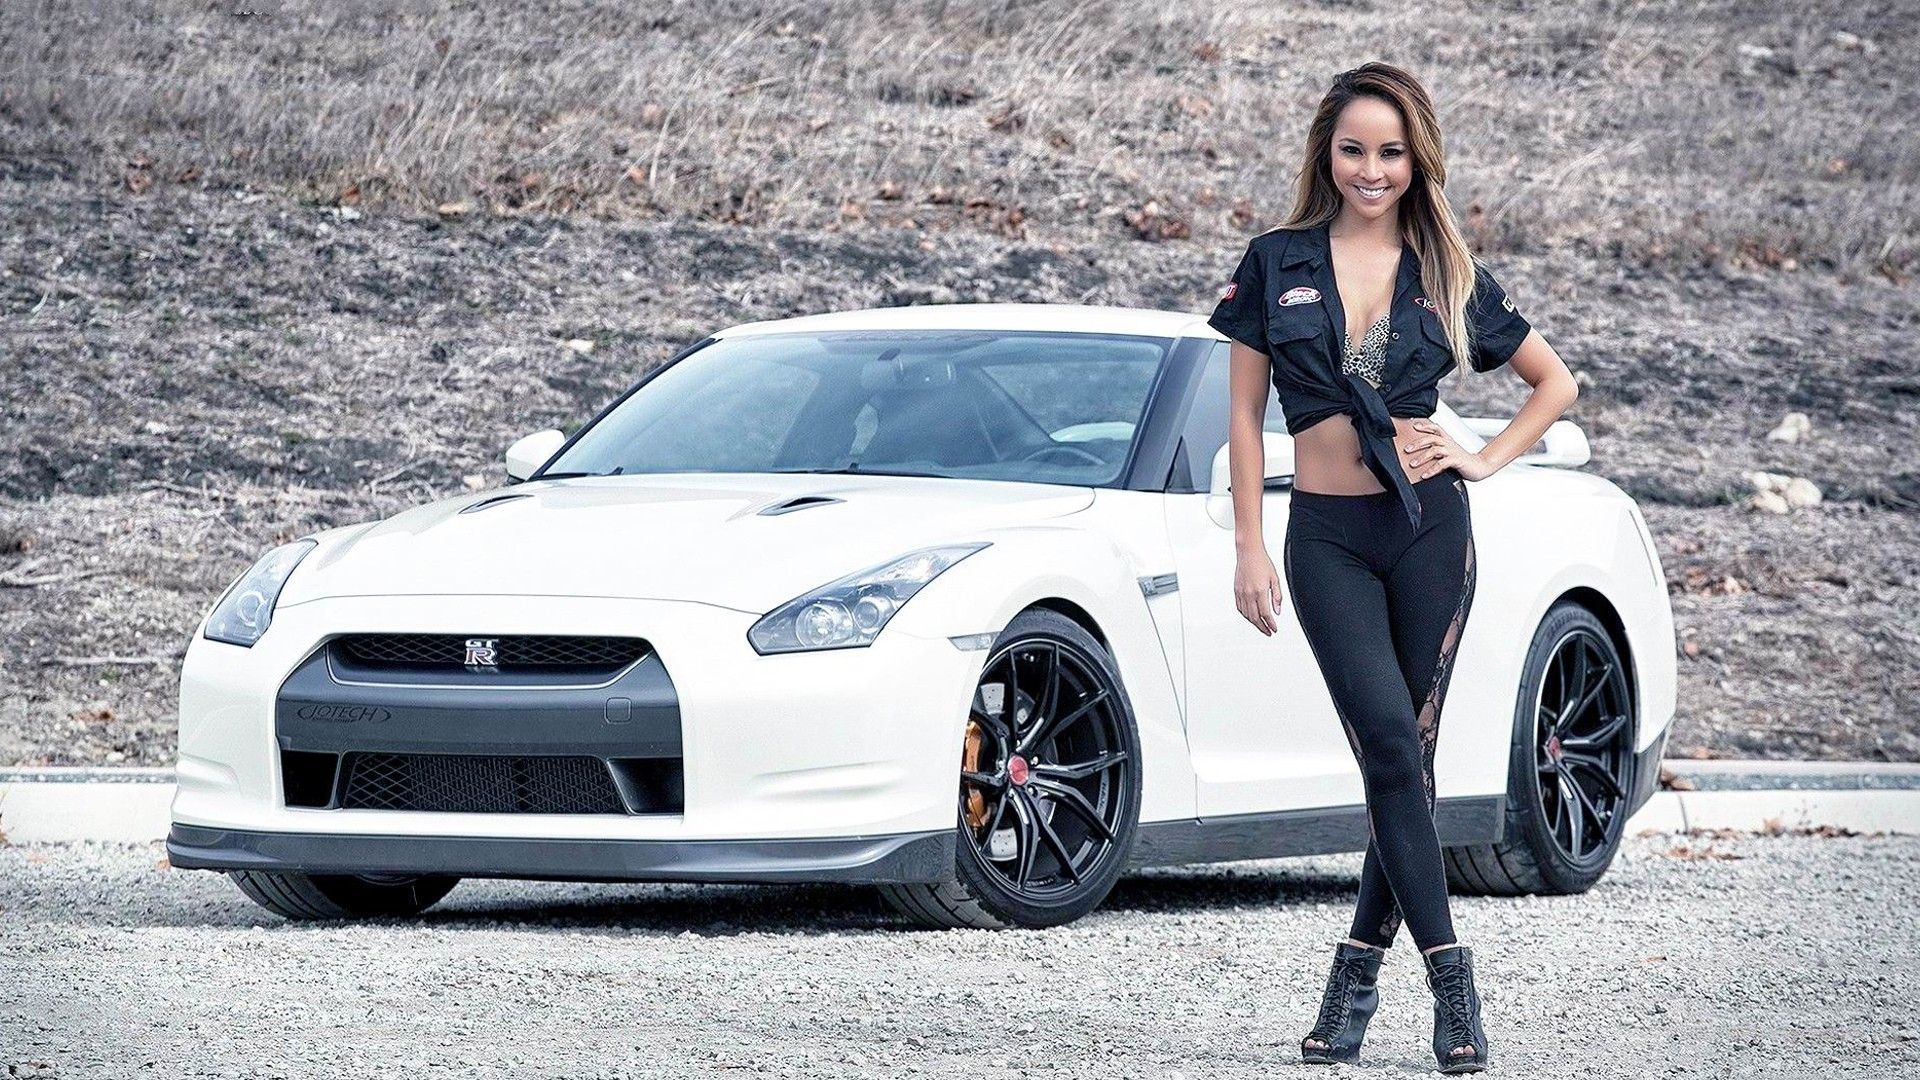 Women With Cars Wallpapers Wallpaper Cave